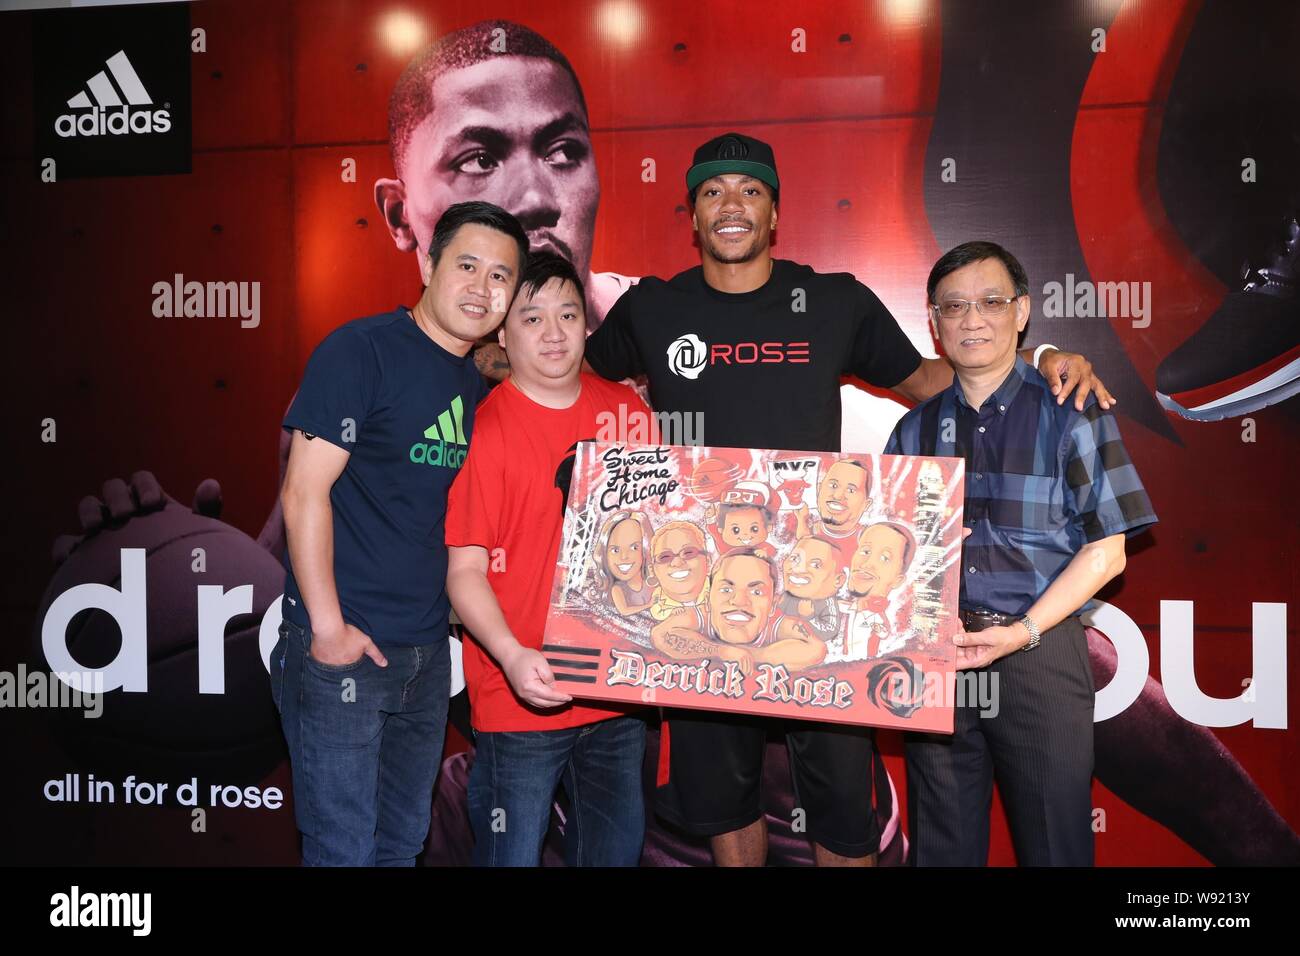 Nba Star Derrick Rose Chicago Bulls Second Right Poses Chinese – Stock  Editorial Photo © ChinaImages #241948448